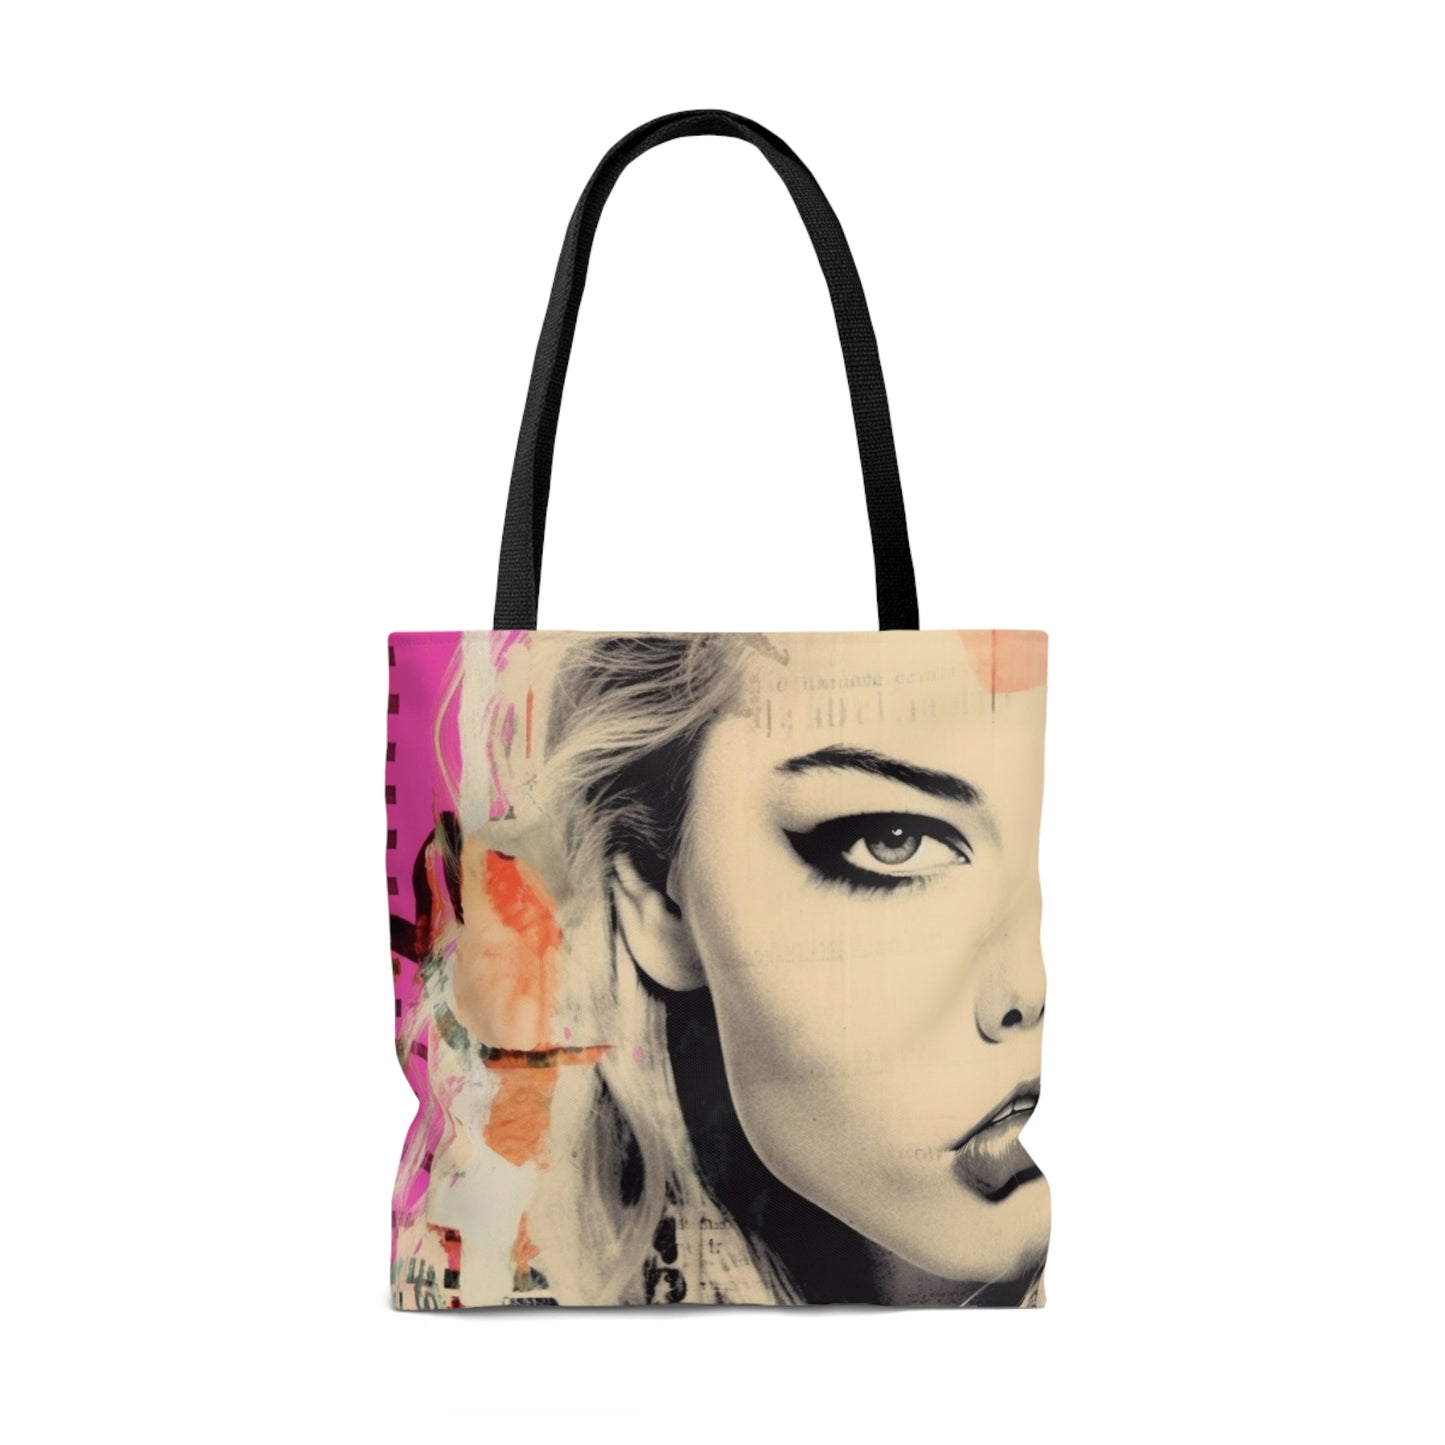 AMOUREUX French Kiss Pop Art, Sexy, Sassy Tote Bag, France Couture, Pop Art, Travel, Fashion, Luxury, Chic French designer deluxe, must have gift item